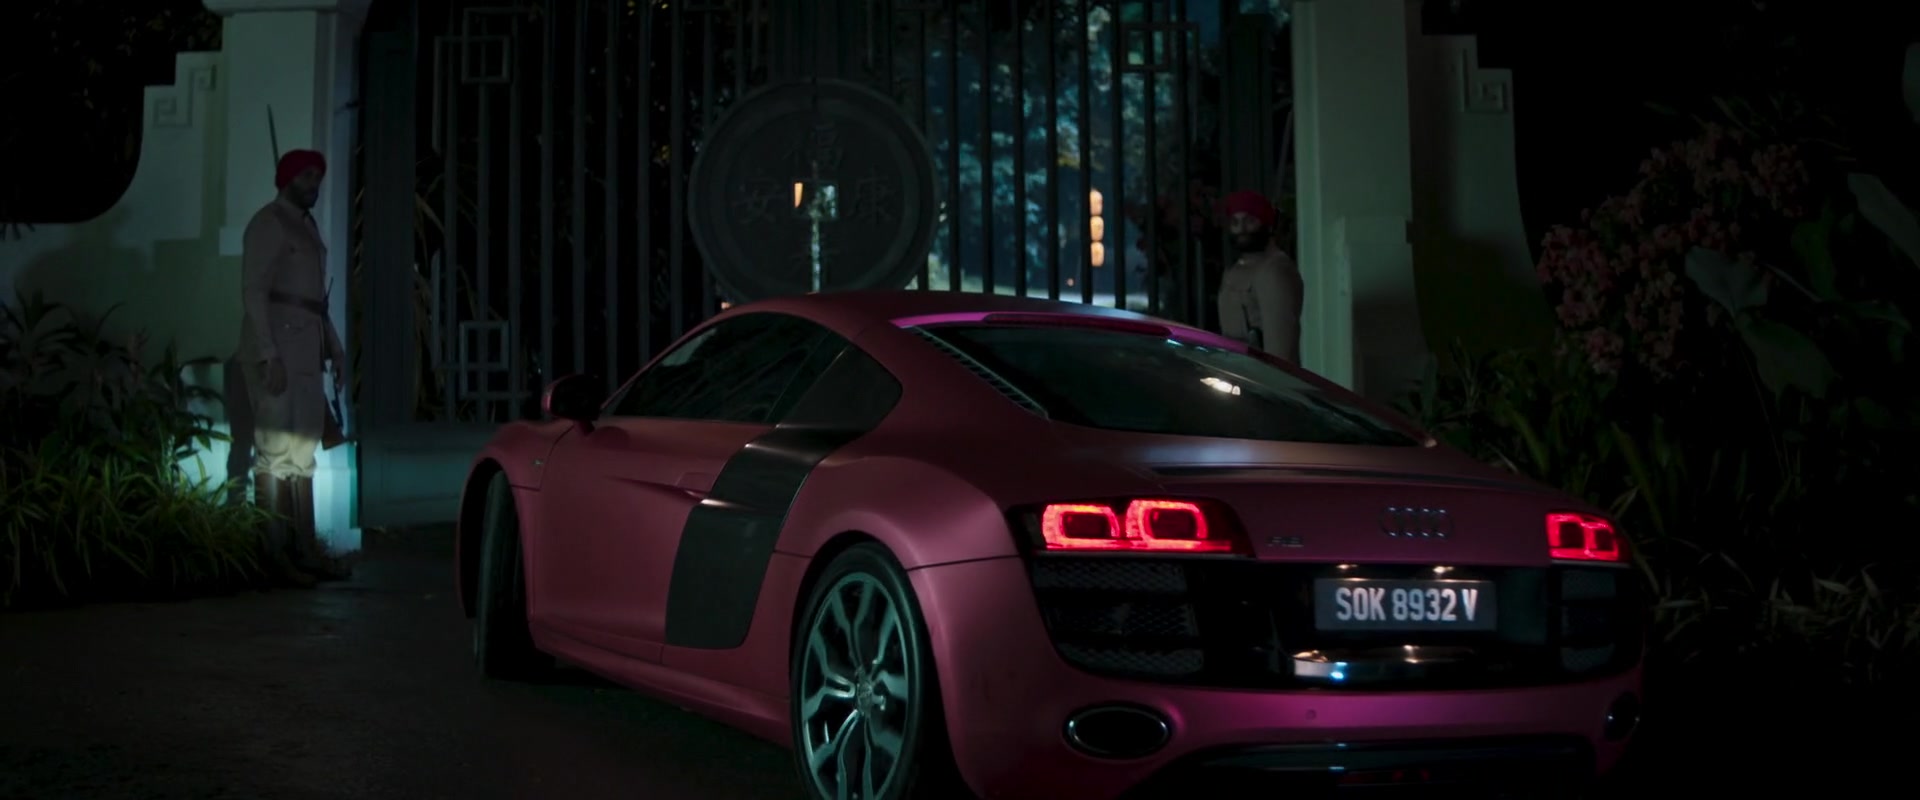 Audi R8 Sports Car Used by Awkwafina in Crazy Rich Asians (2018) Movie